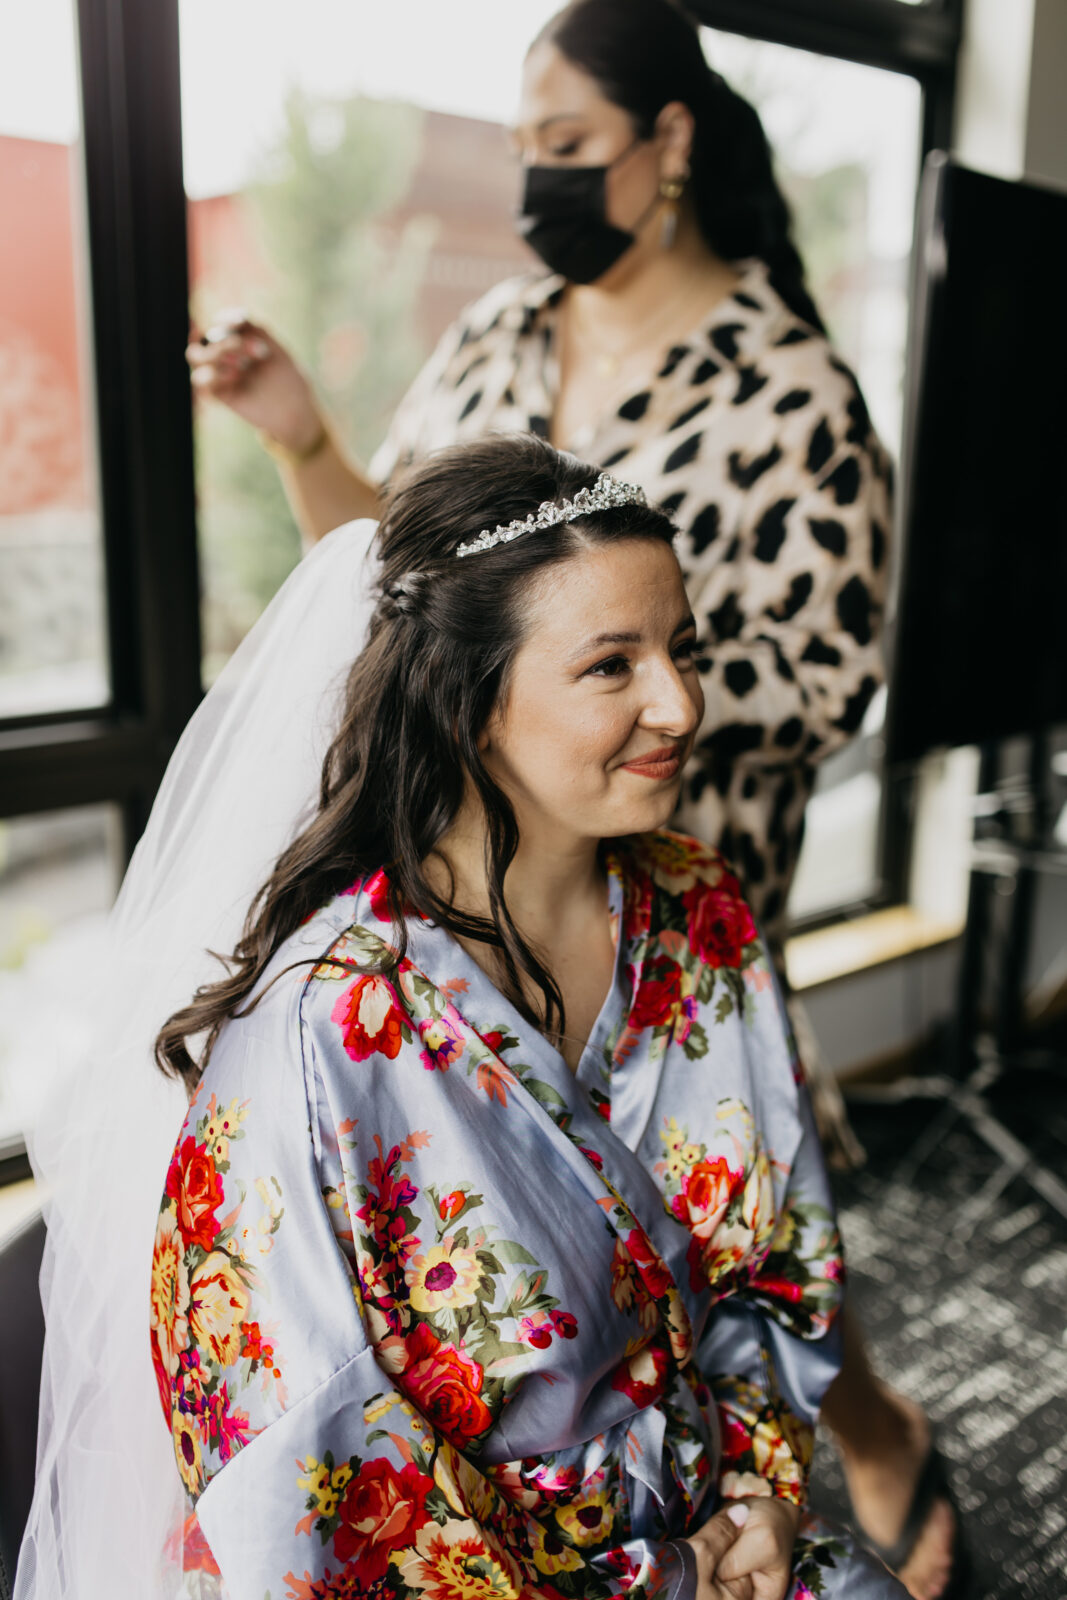 Photo of a bride getting ready for her wedding day